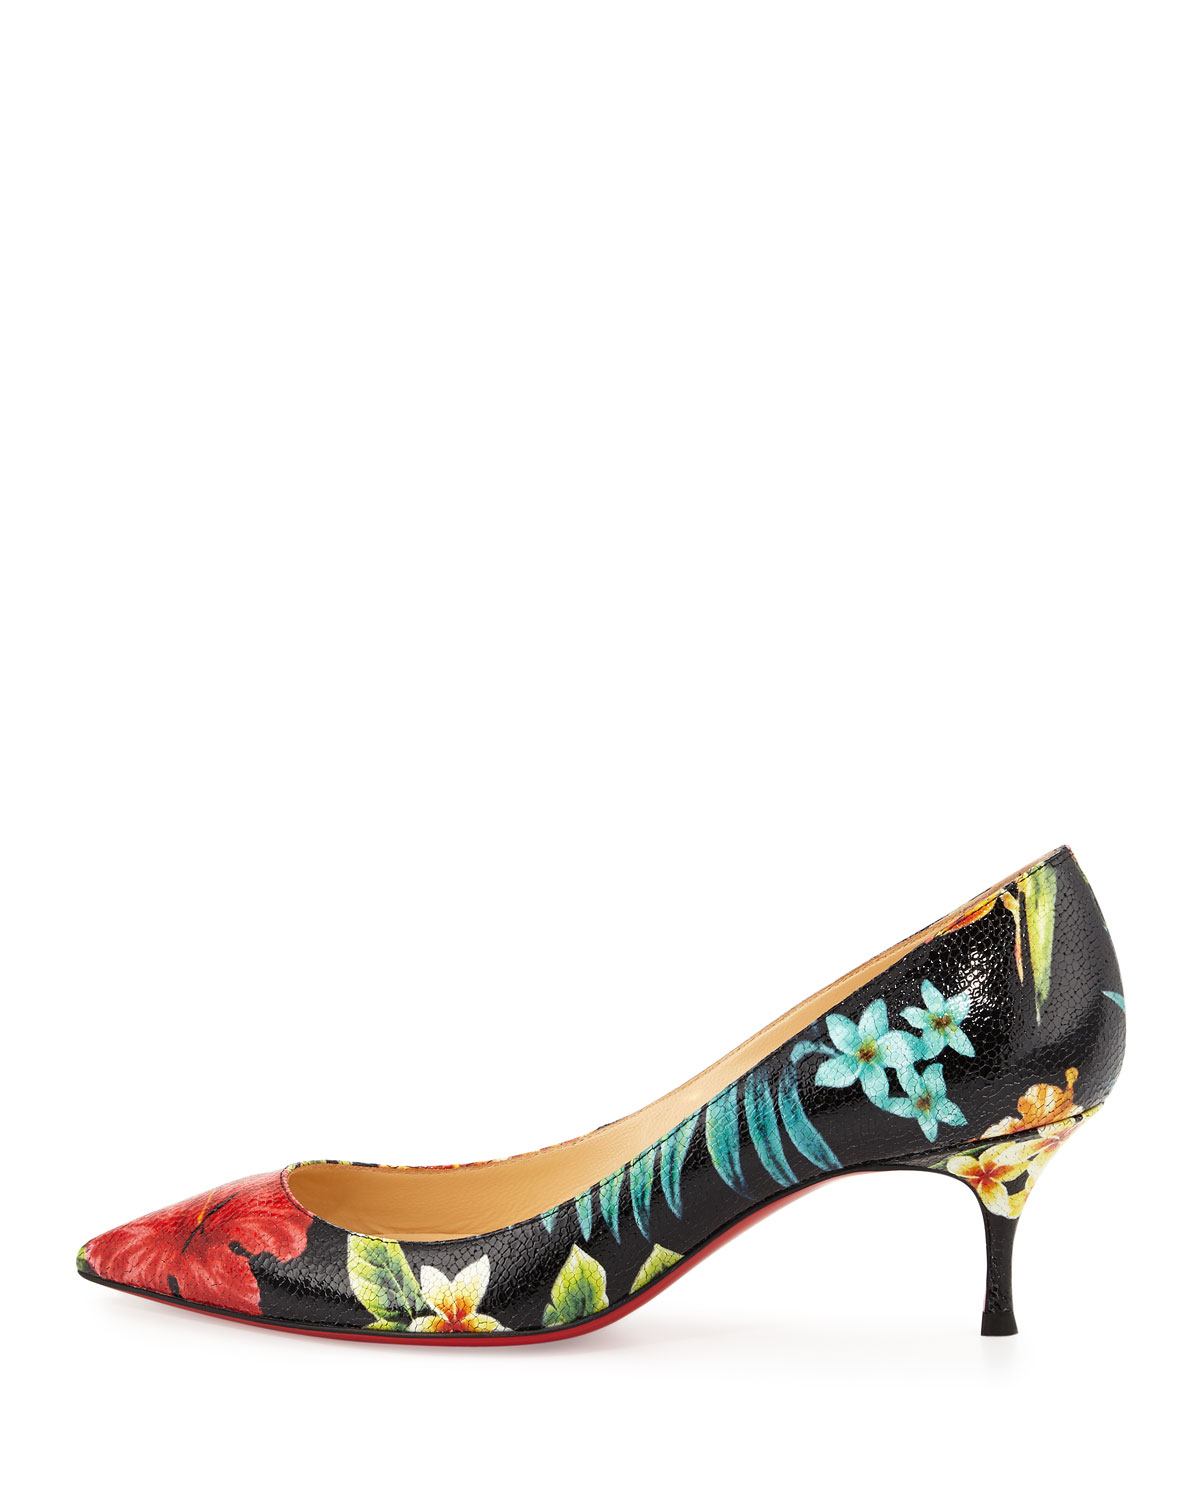 louboutins shoes - christian-louboutin-black-pigalle-follies-floral-55mm-red-sole-pump-product-1-177741807-normal.jpeg